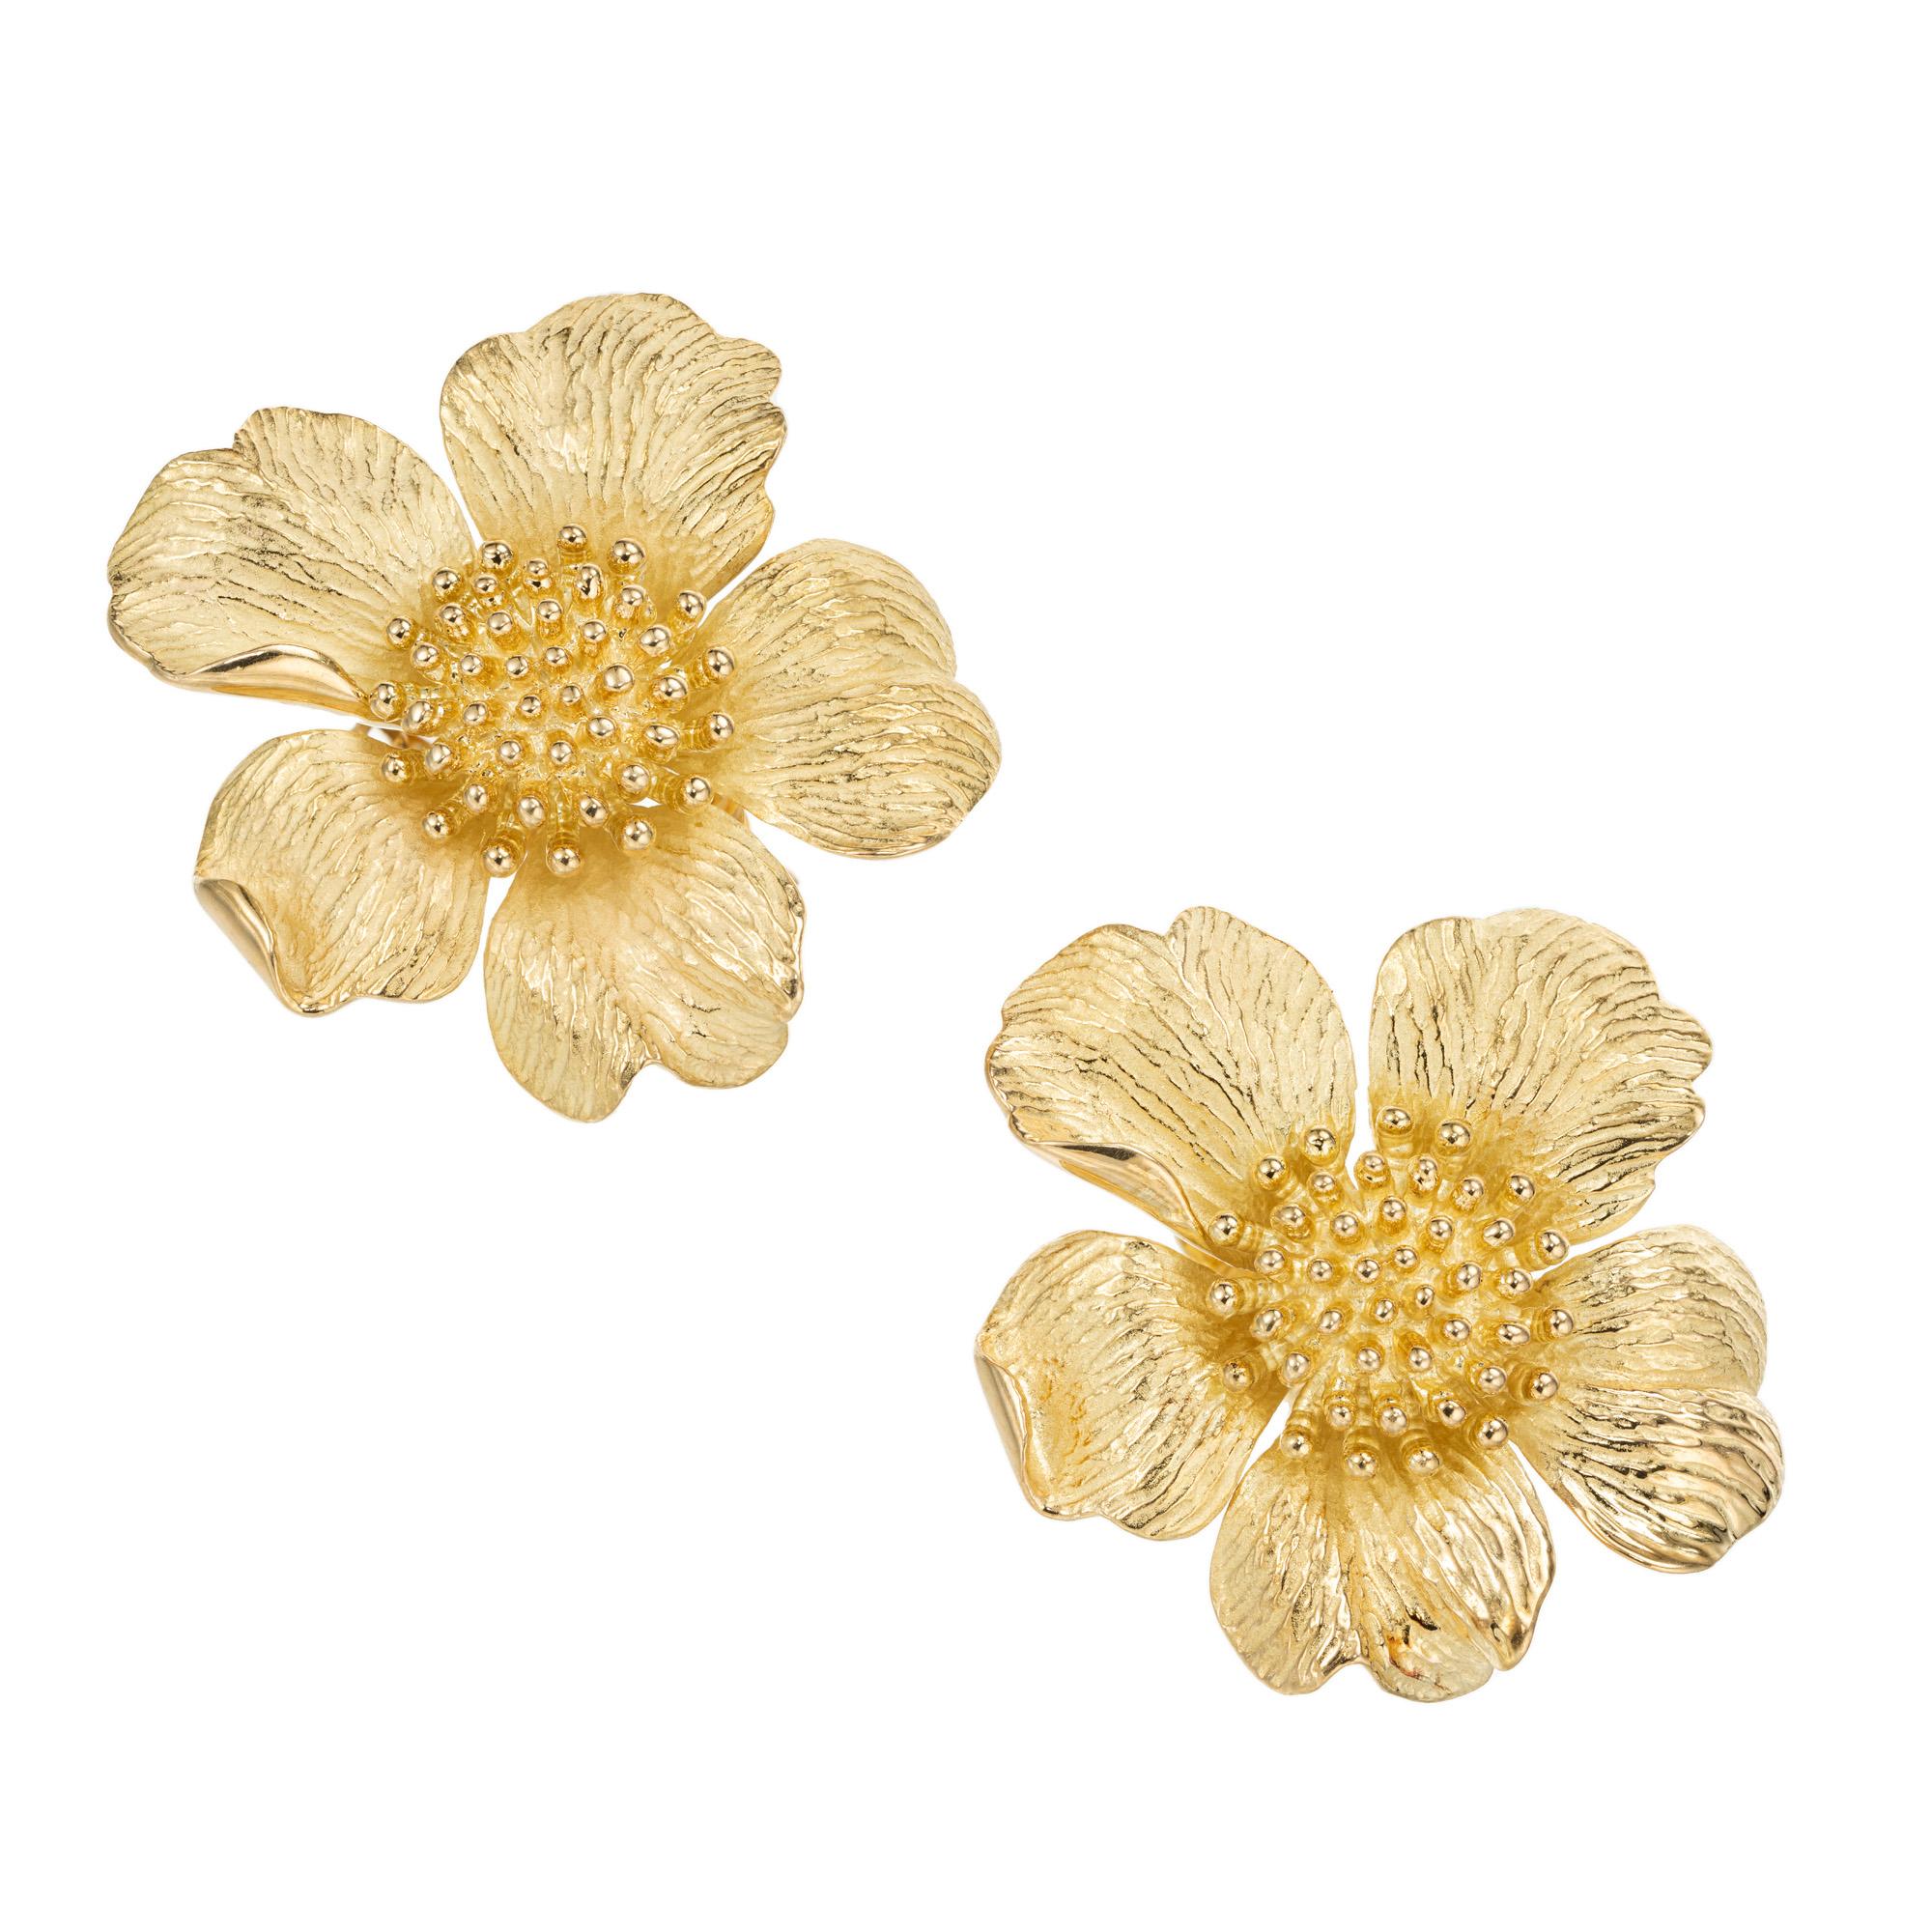 Tiffany & Co. Large dogwood flower motif clip post 3D earrings. These earrings are part of Tiffany's The American perennial collection which was created in the 1980's and featured flowers such as the Dogwood, Marguerite, Azalea, Wild Rose and the